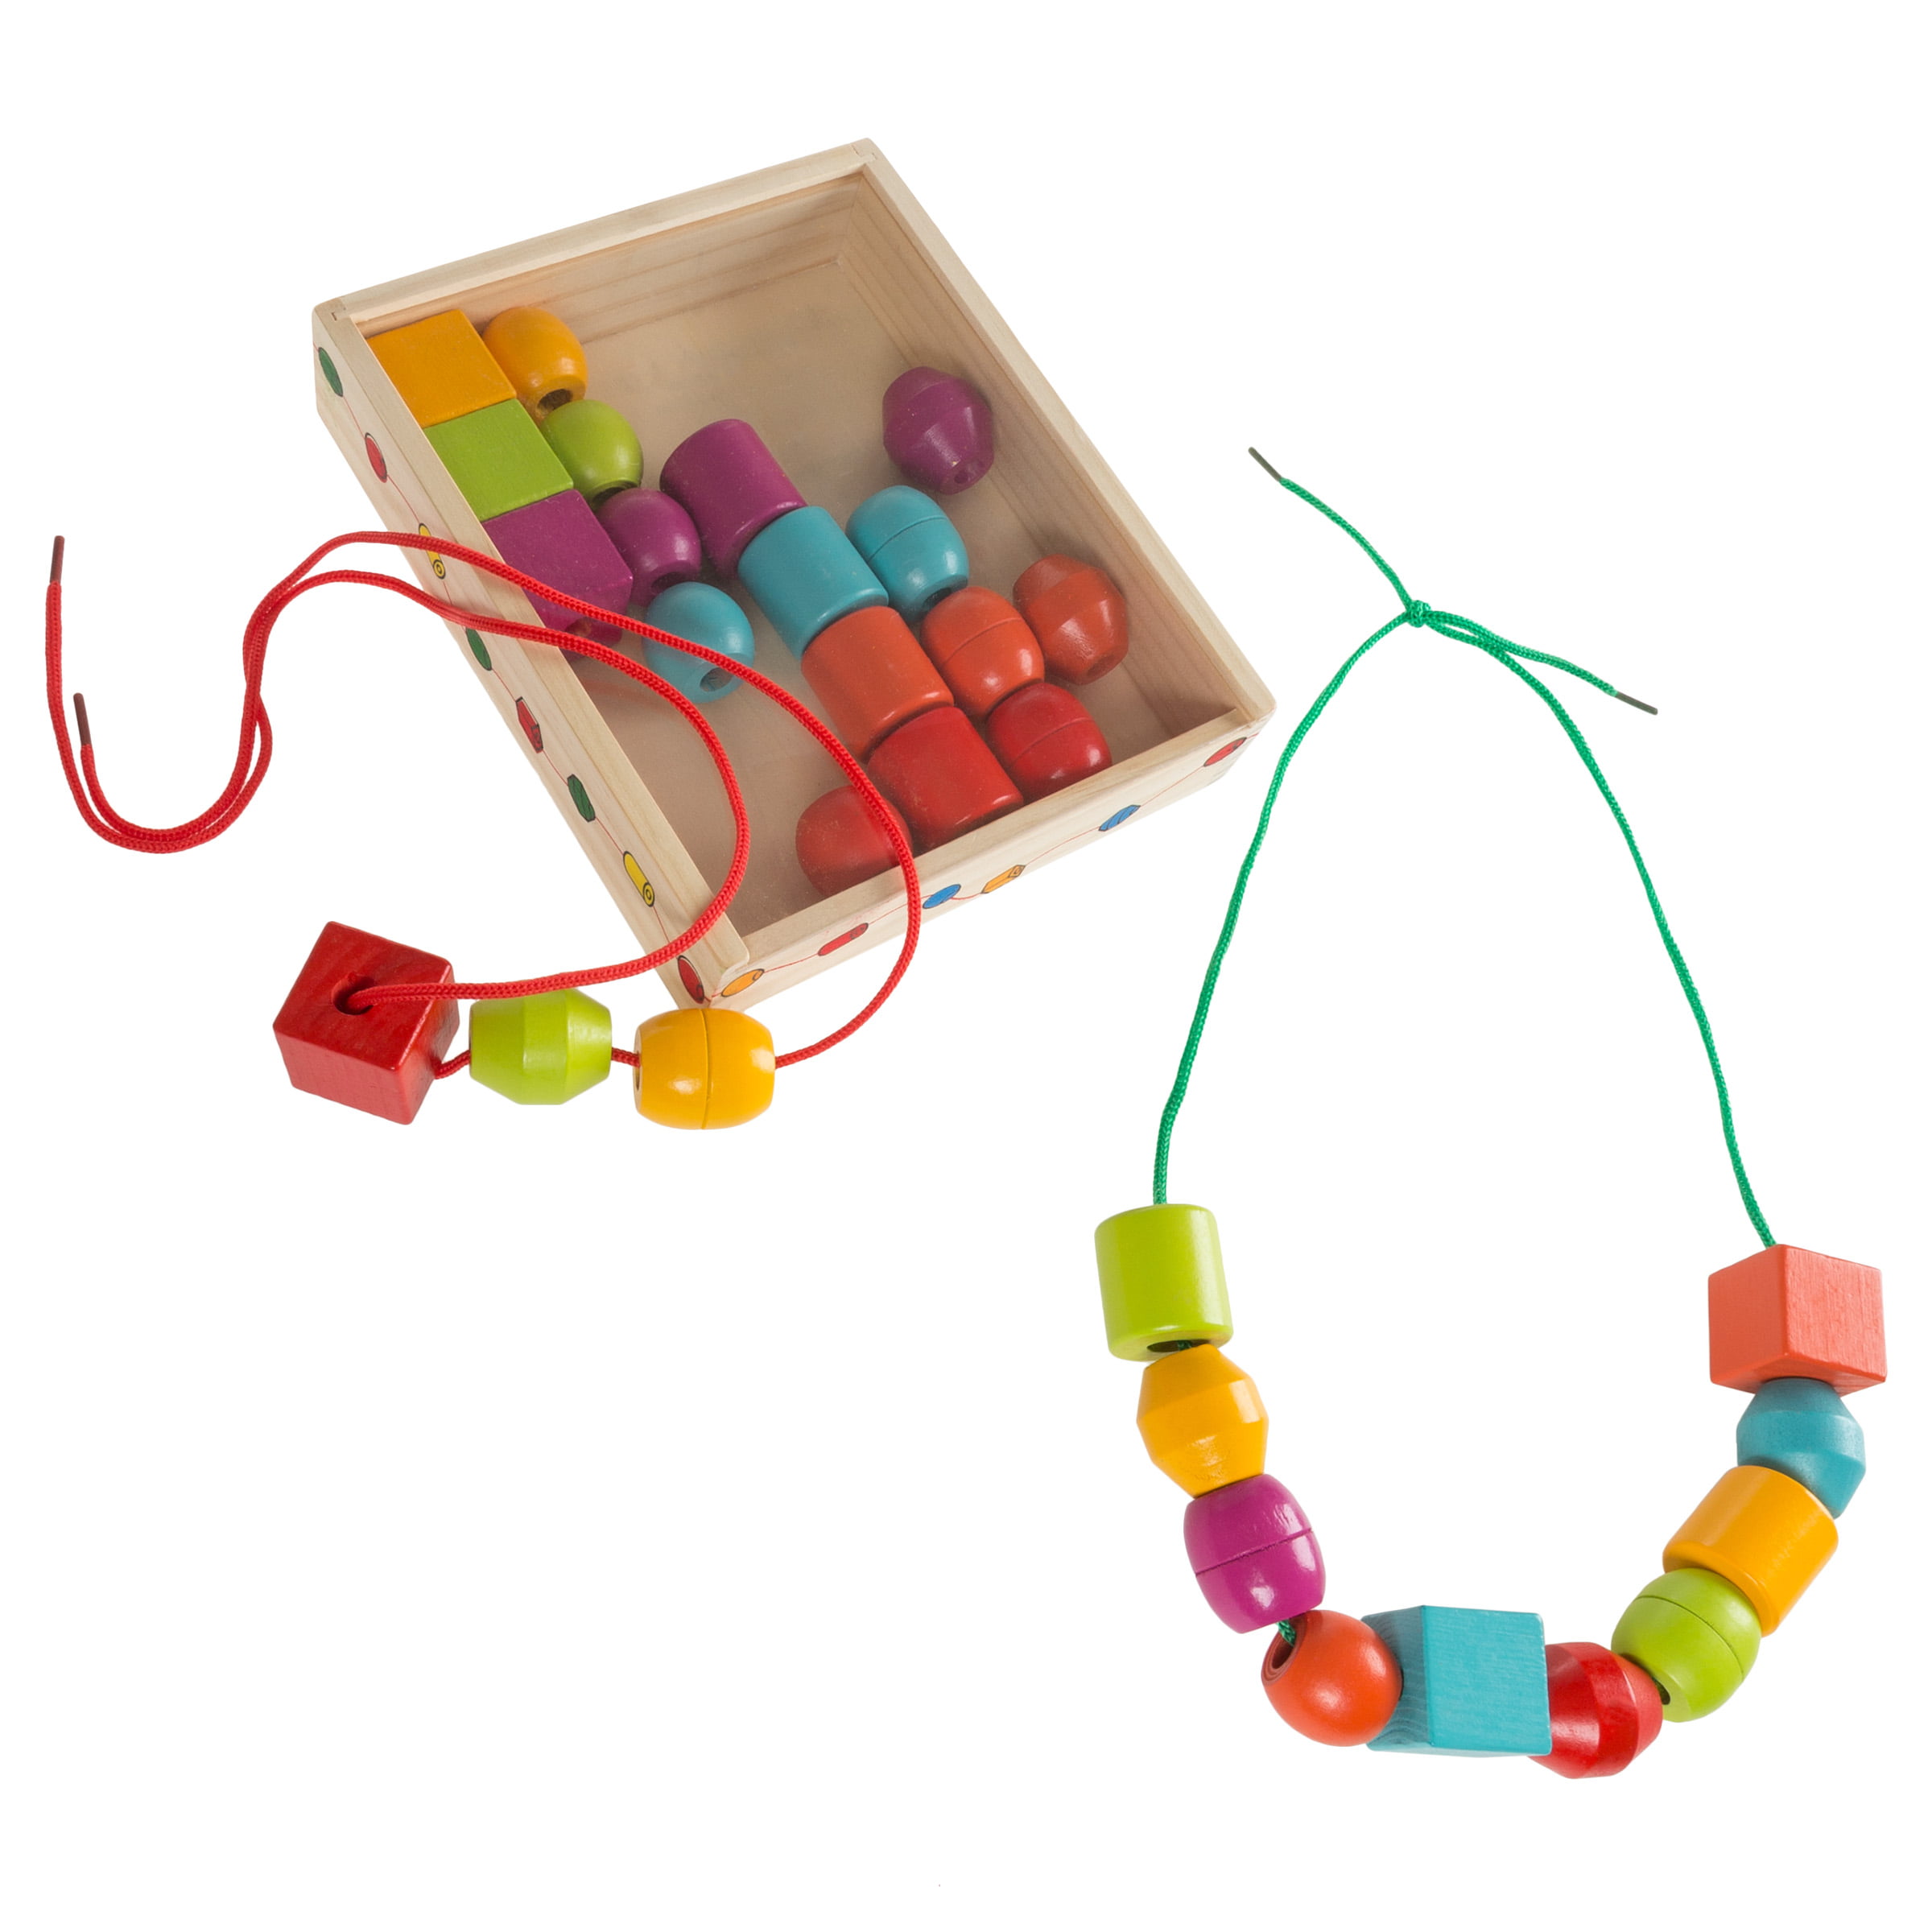 MELISSA & DOUG KIDS PRIMARY LACING WOODEN BEAD SET 30 BEADS 2 LACES NEW AGE 3+ 